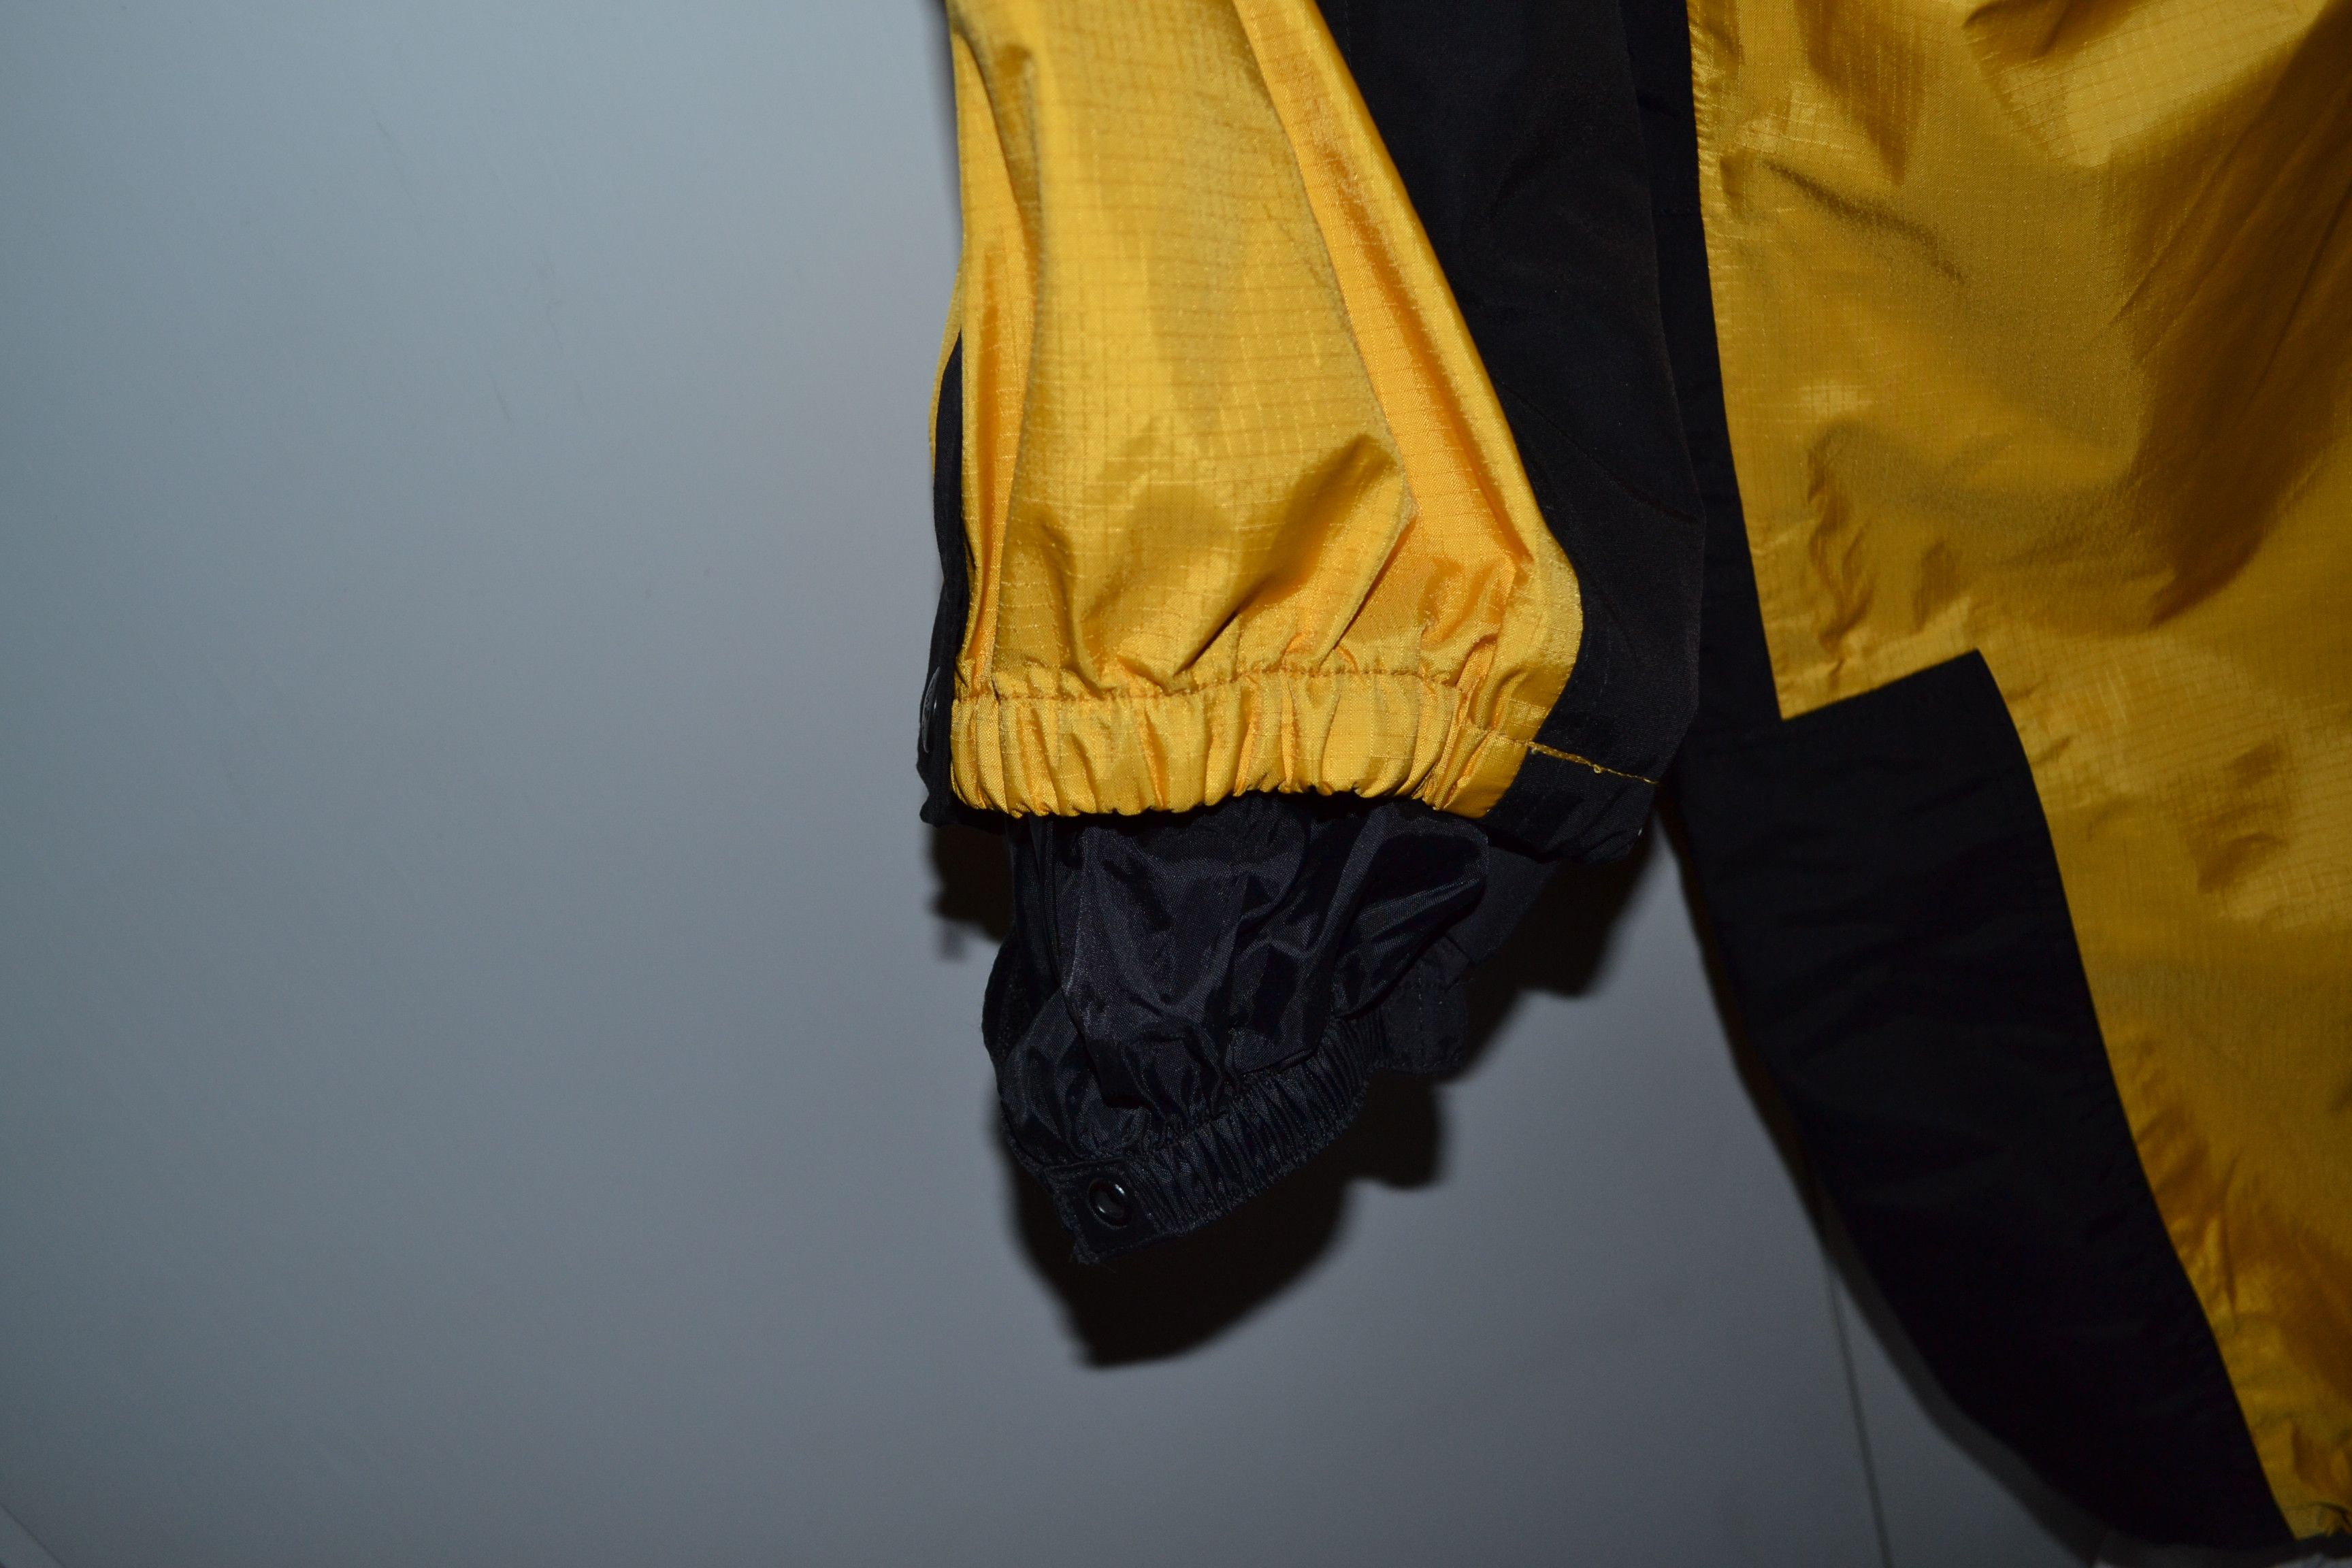 The North Face The North Face Vintage BIB XL Overall Yellow Ripstop Gore-tex Deadstock Winter Hardshell Suit Rare Supreme 90s piece Karakoram Salopette Size US 36 / EU 52 - 9 Thumbnail